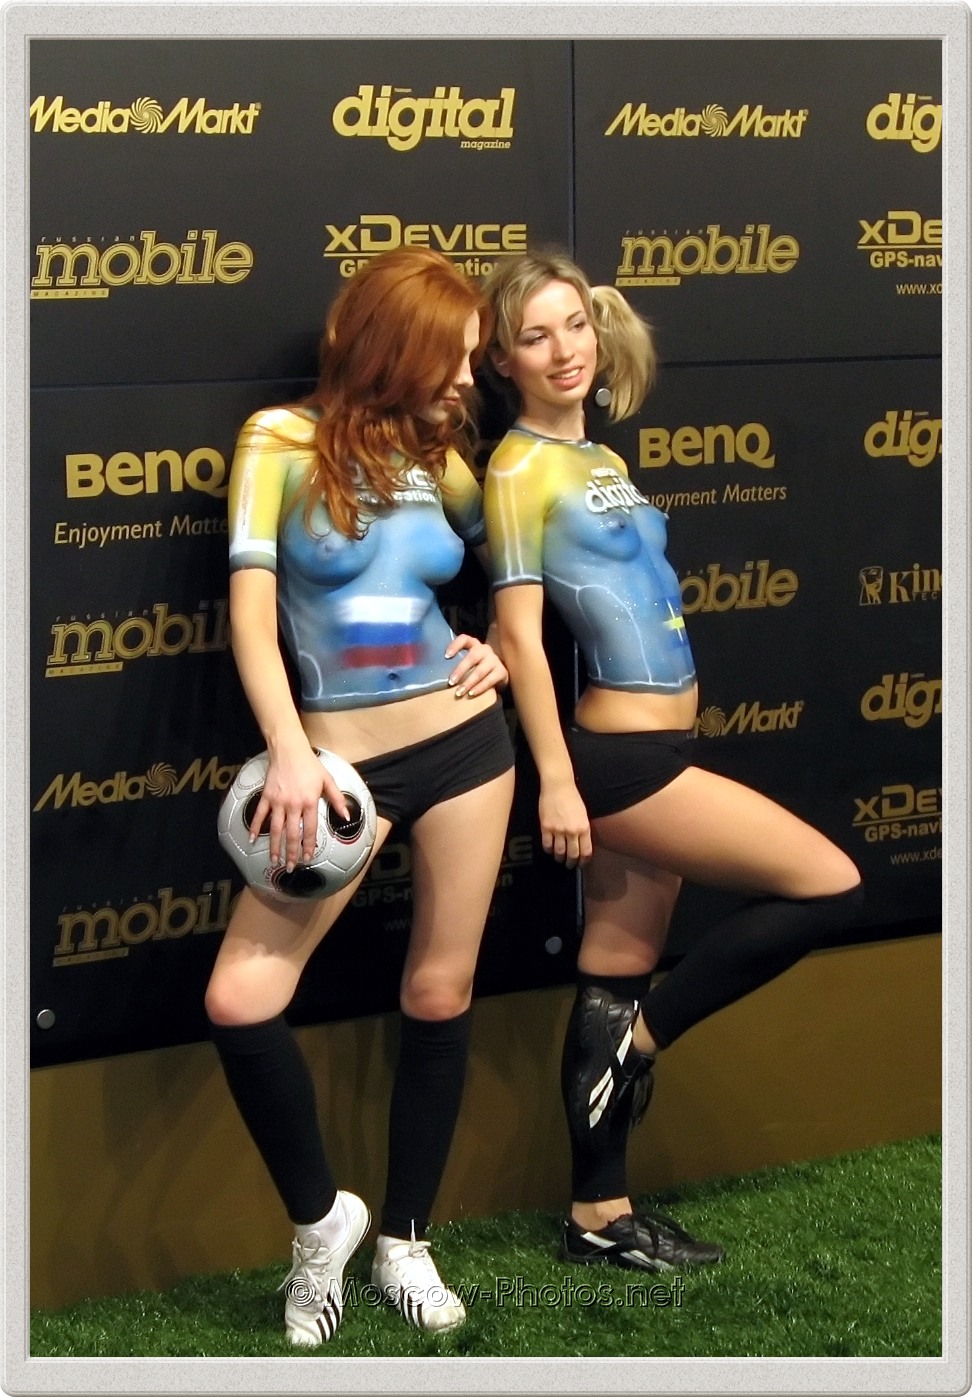 Body Painted Soccer Fans at Photoforum - 2008, Moscow